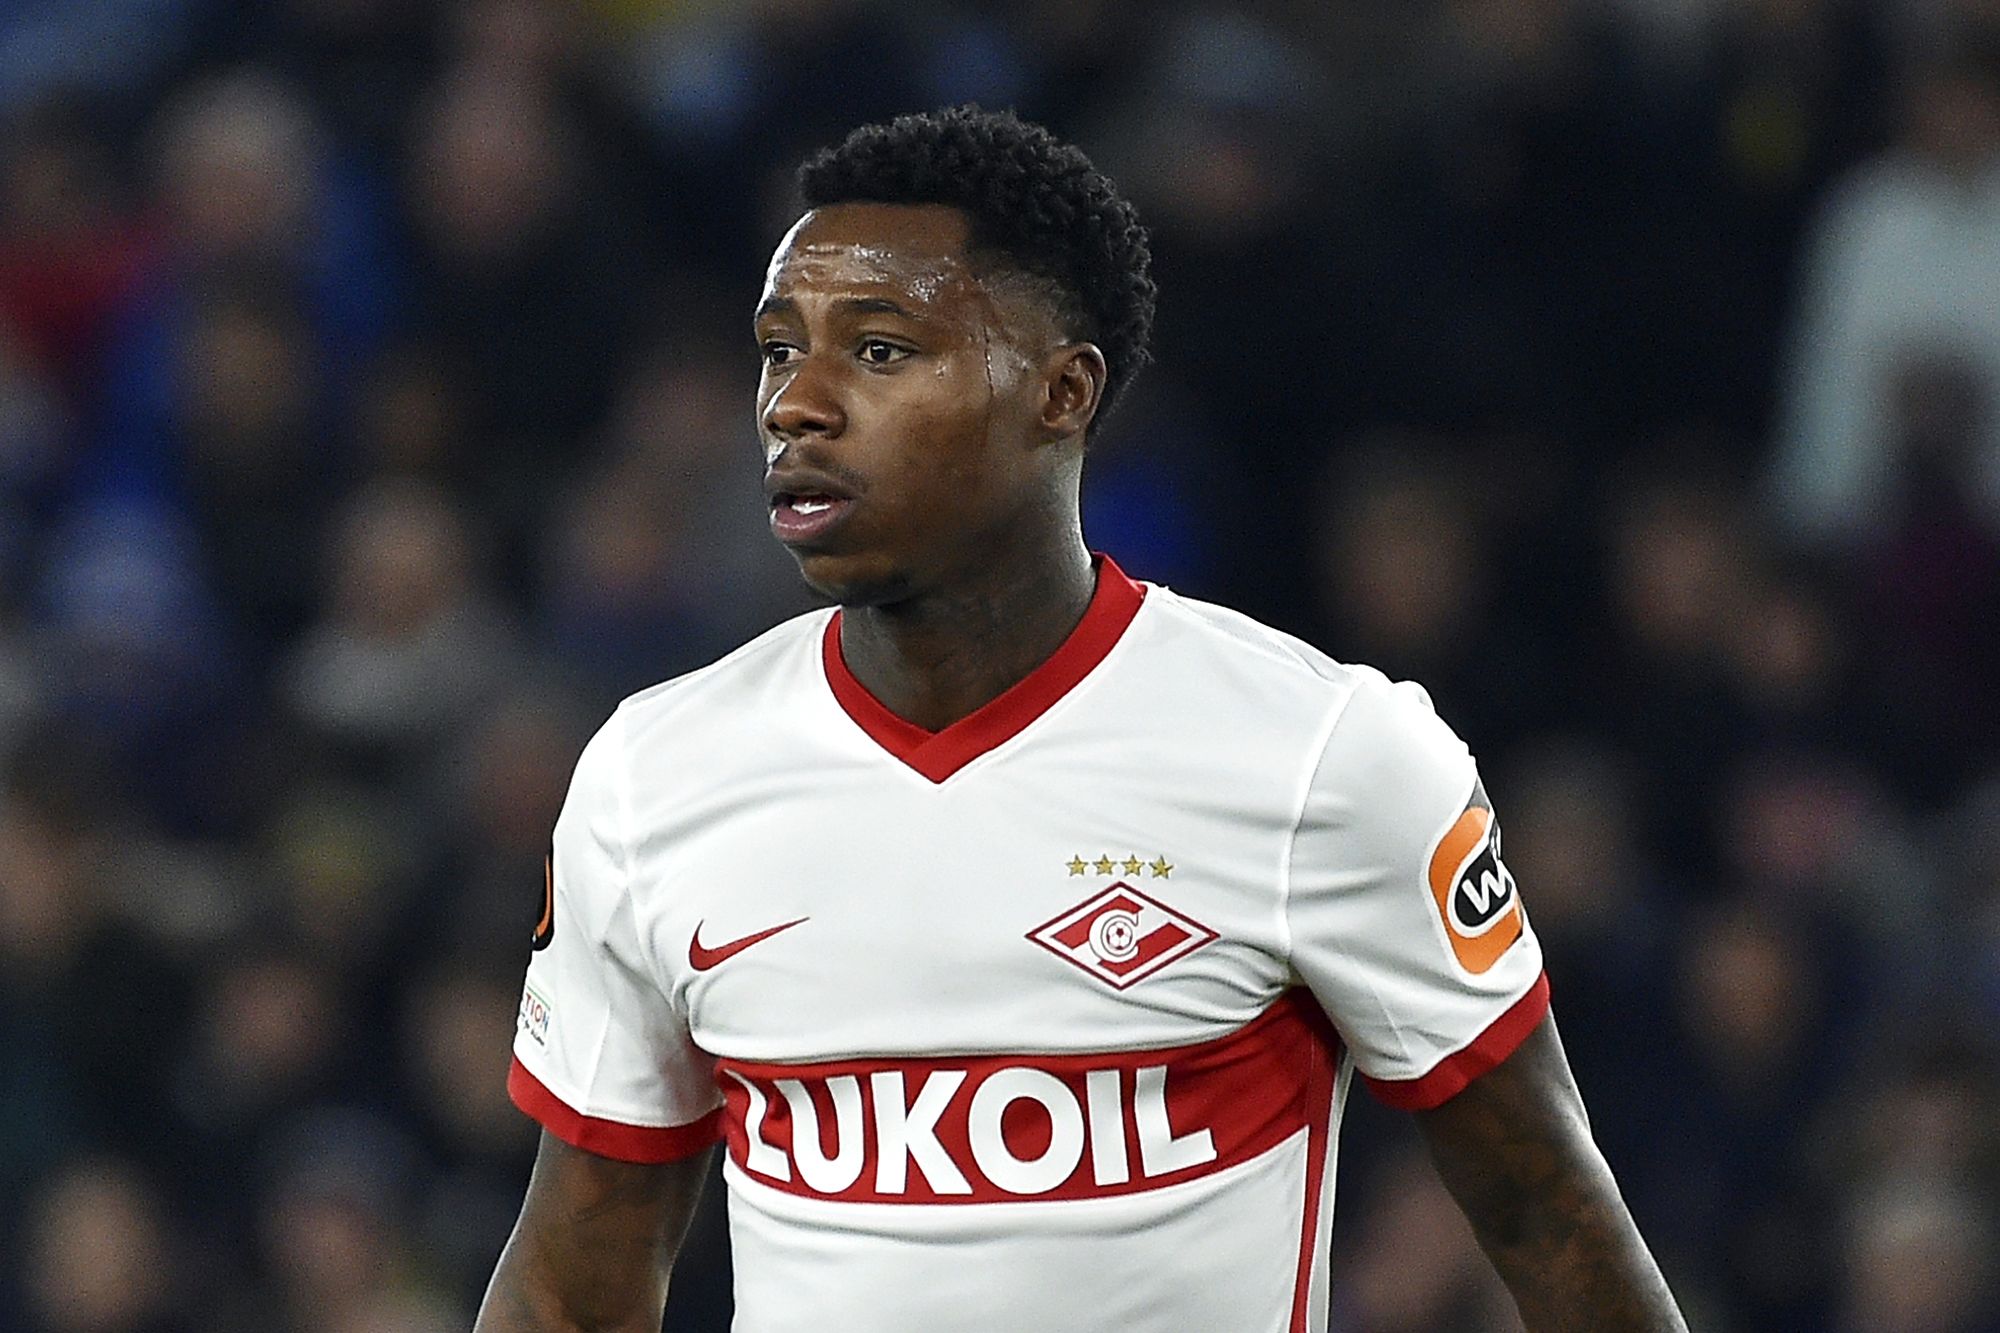 Quincy Promes: Dutch soccer star convicted in absentia for drug trafficking is arrested in Dubai - Crime and Courts - News